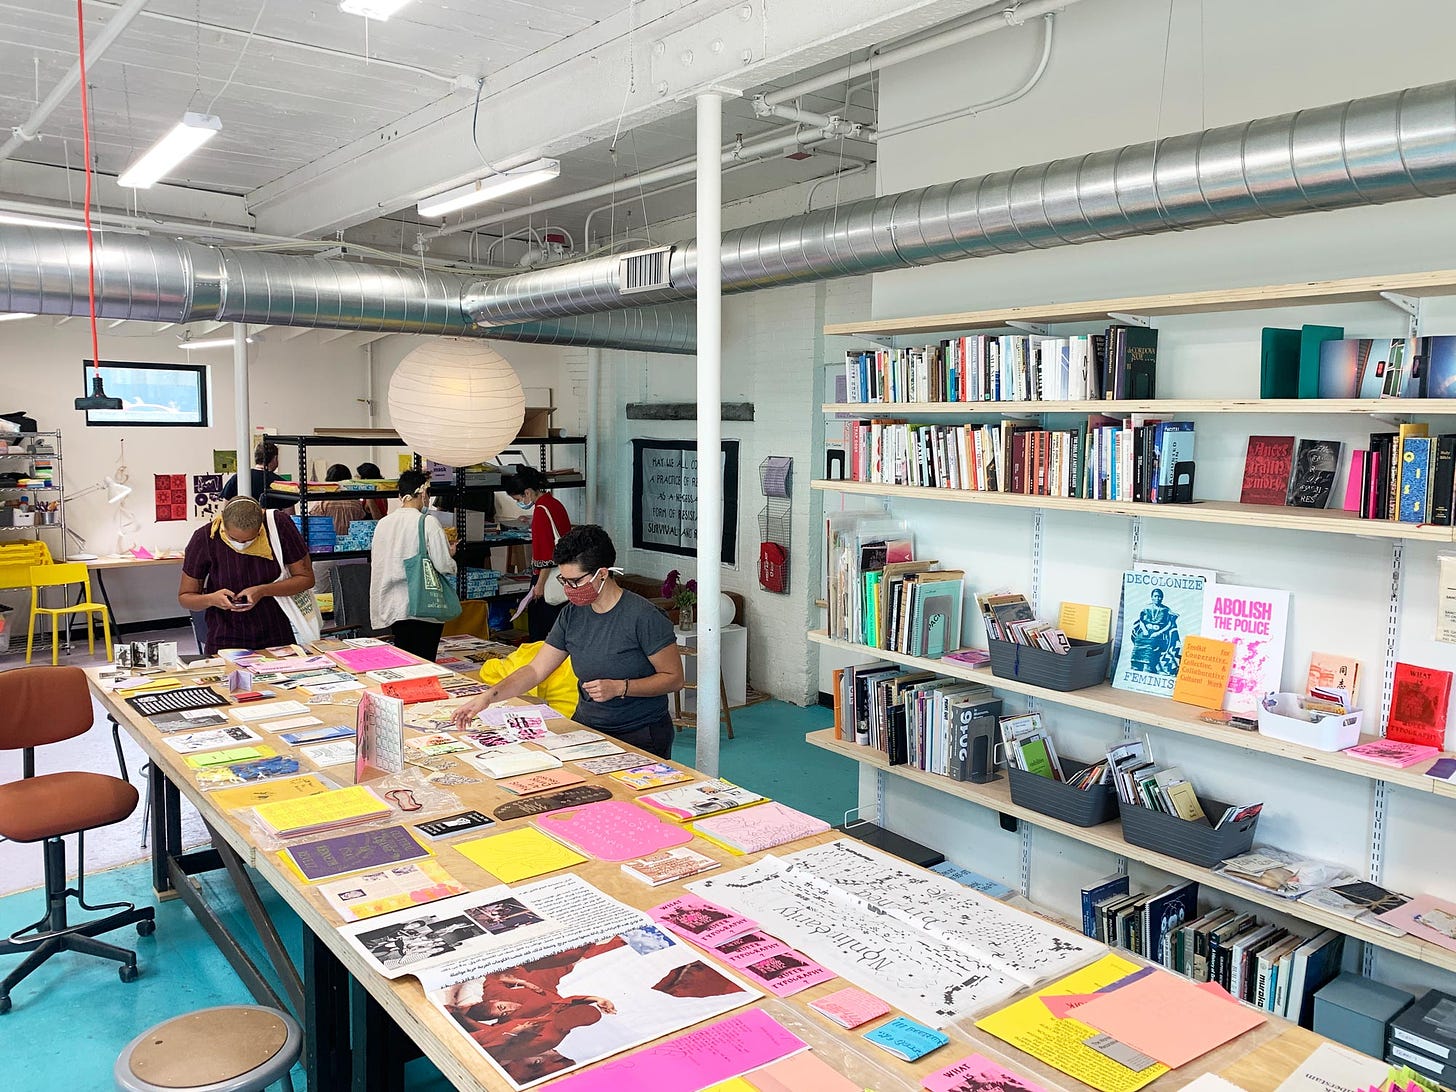 View of the Queer.Archive.Work library and reading space, showing a colorful array of printed materials laid out on long tables. On the wall are shelves of books and zines. Several masked people are in the space looking at the materials.